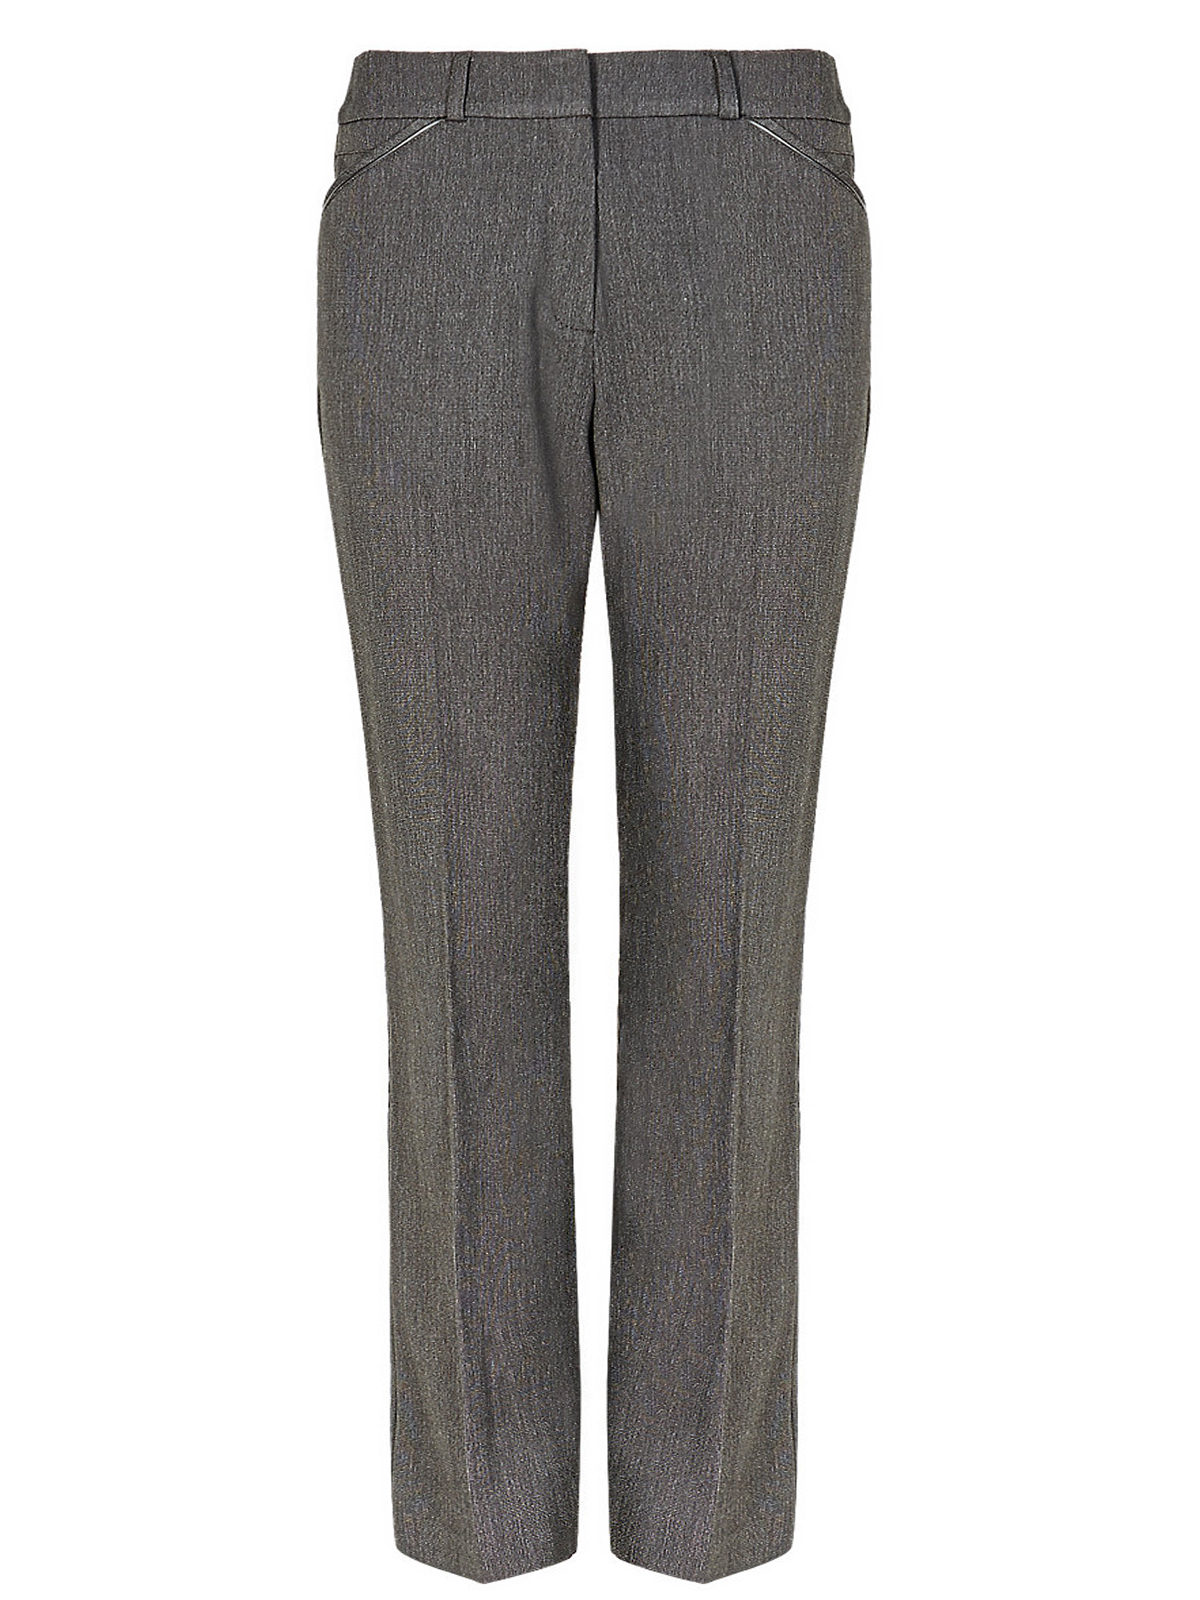 Marks and Spencer - - M&5 CHARCOAL Piped Pocket Slim Leg Trousers - Size 20